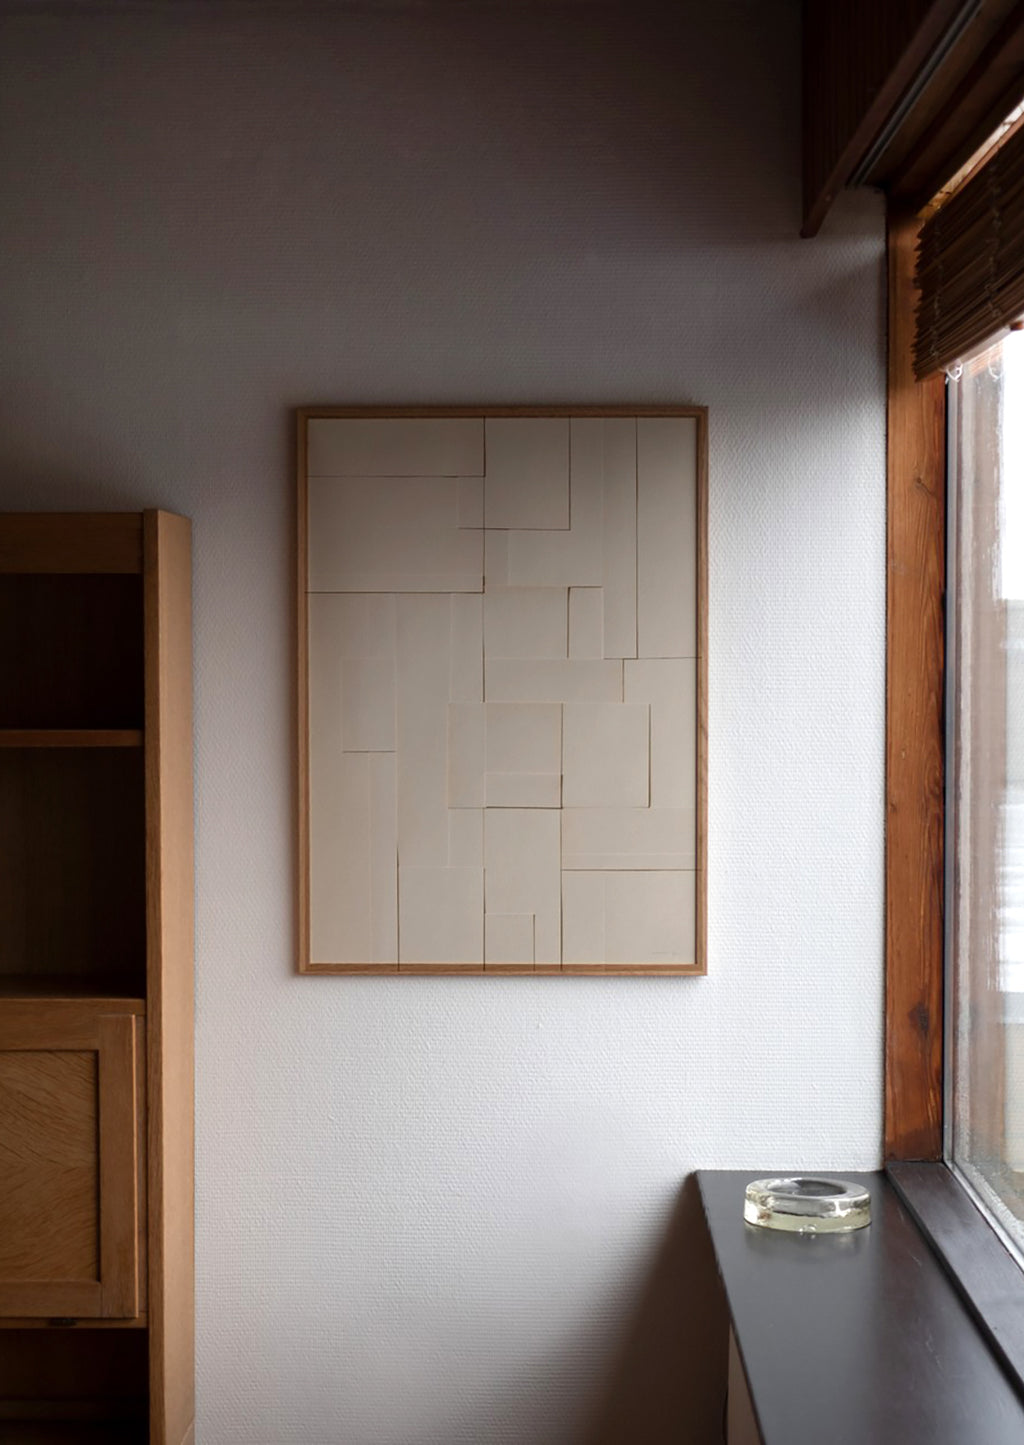 2: An art print featuring a photograph of layered neutral pieces of paper cut in squares and rectangles.